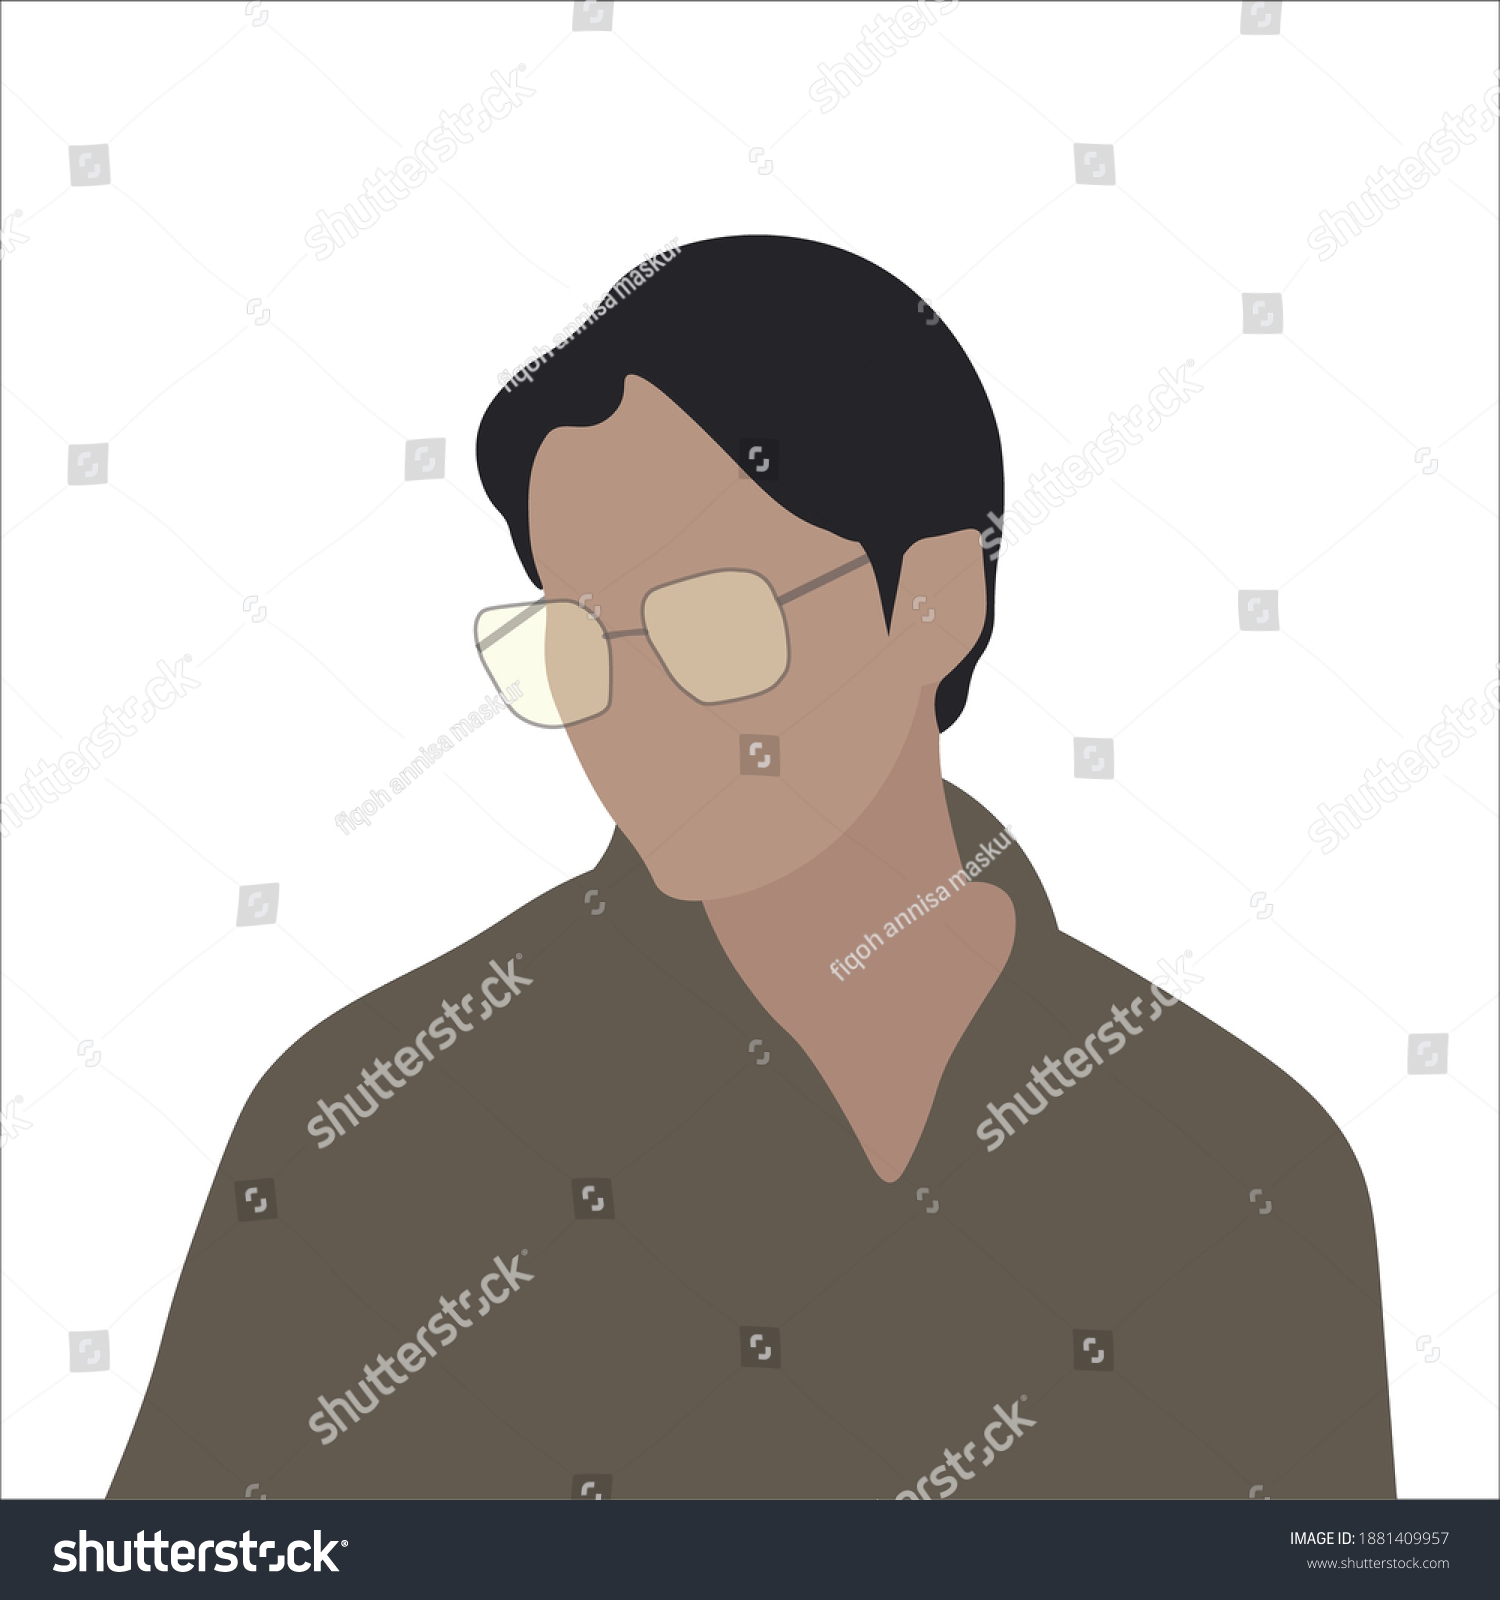 SVG of a man with black hair wearing glasses  svg